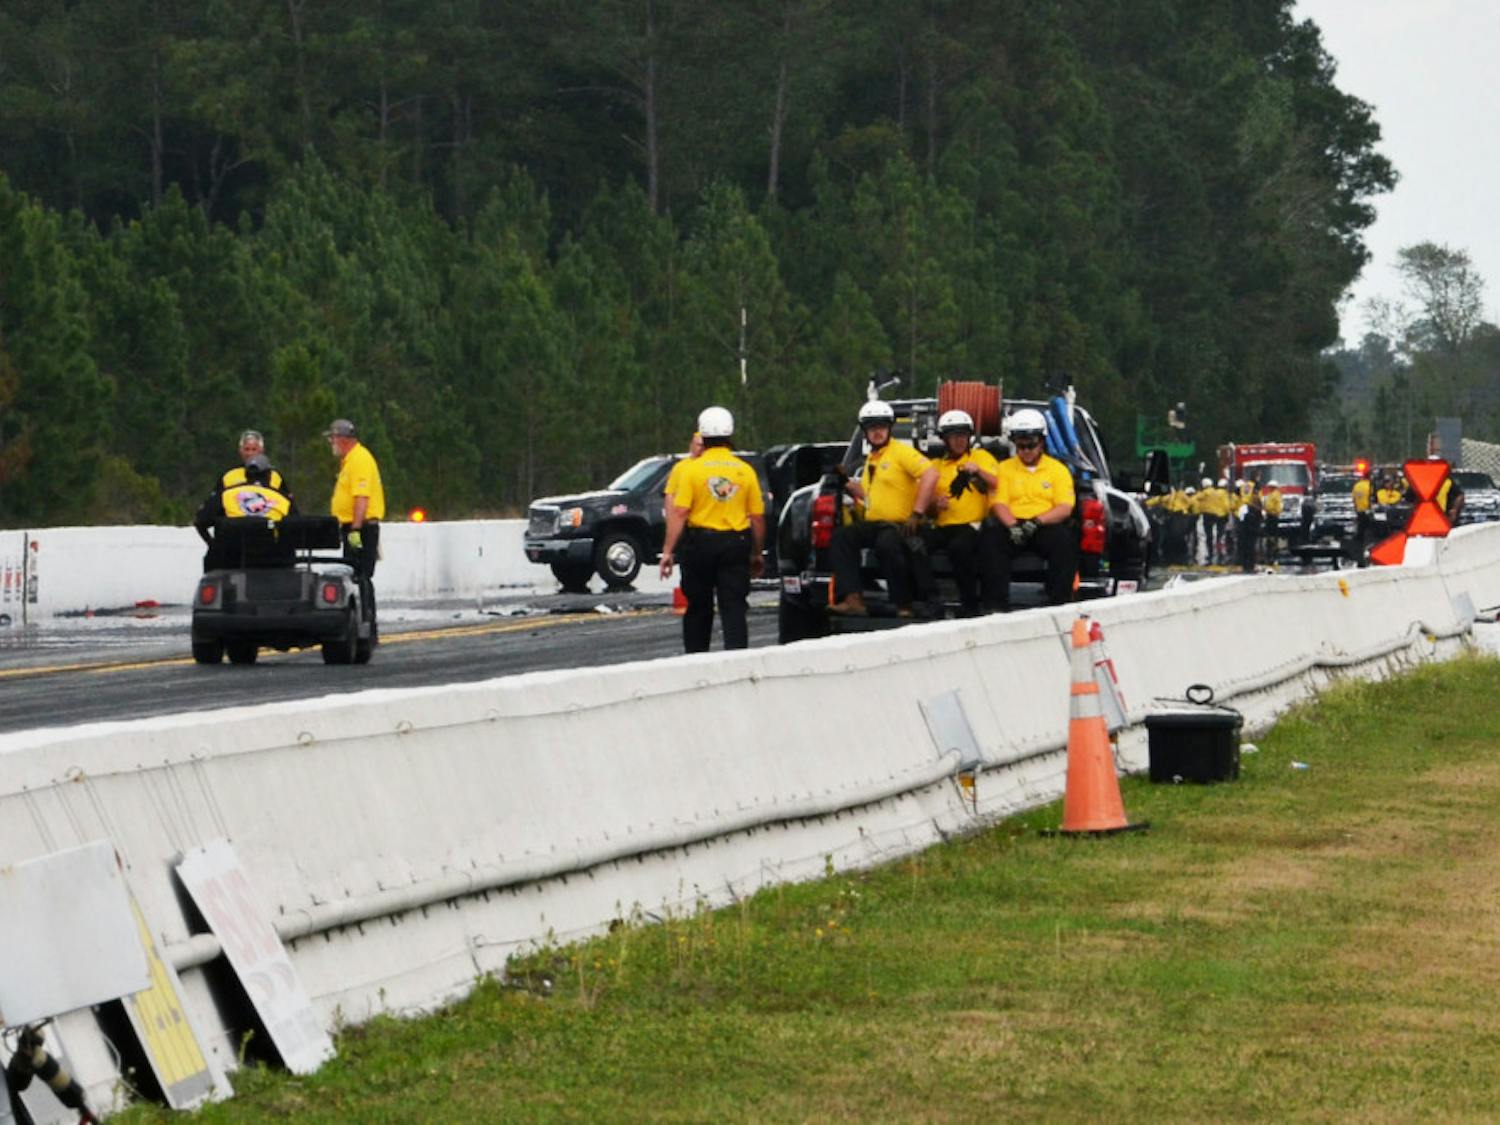 Emergency officials inspect the area near the finish line at Auto Plus Raceway in Gainesville following Top Fuel drag racer Larry Dixon's crash on Saturday at the 2015 Gatornationals.